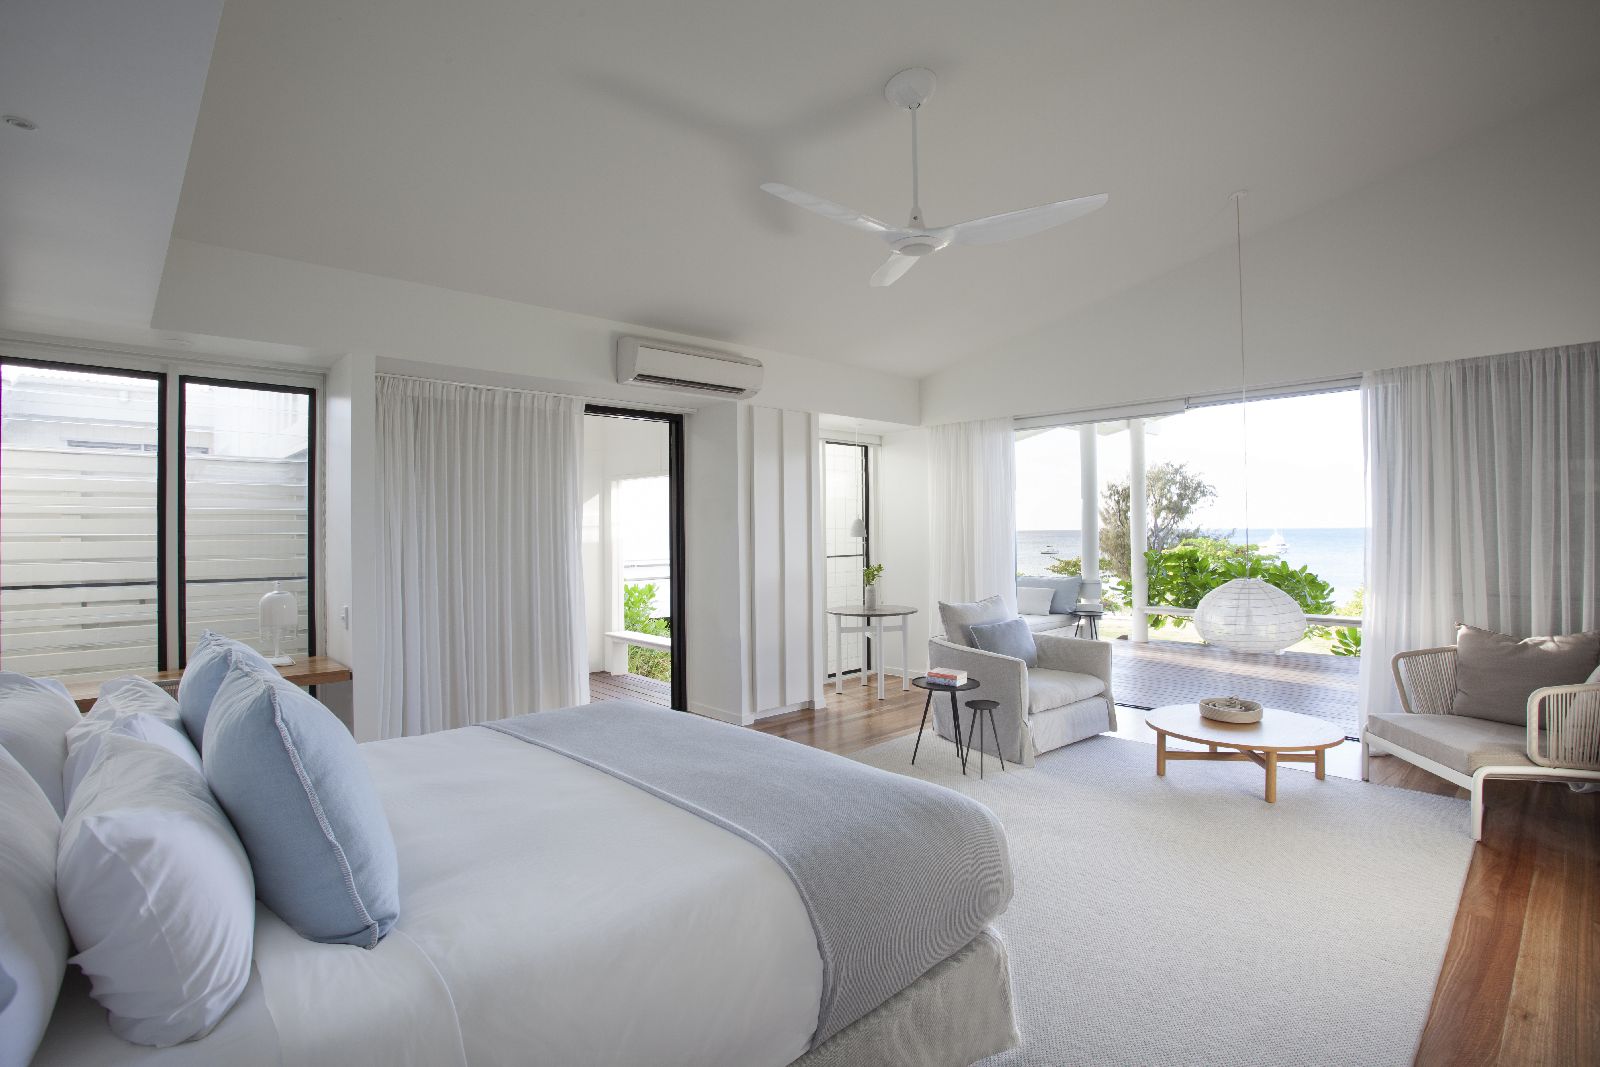 A beachfront suite at the Lizard Island Resort on Australia's Great Barrier Reef